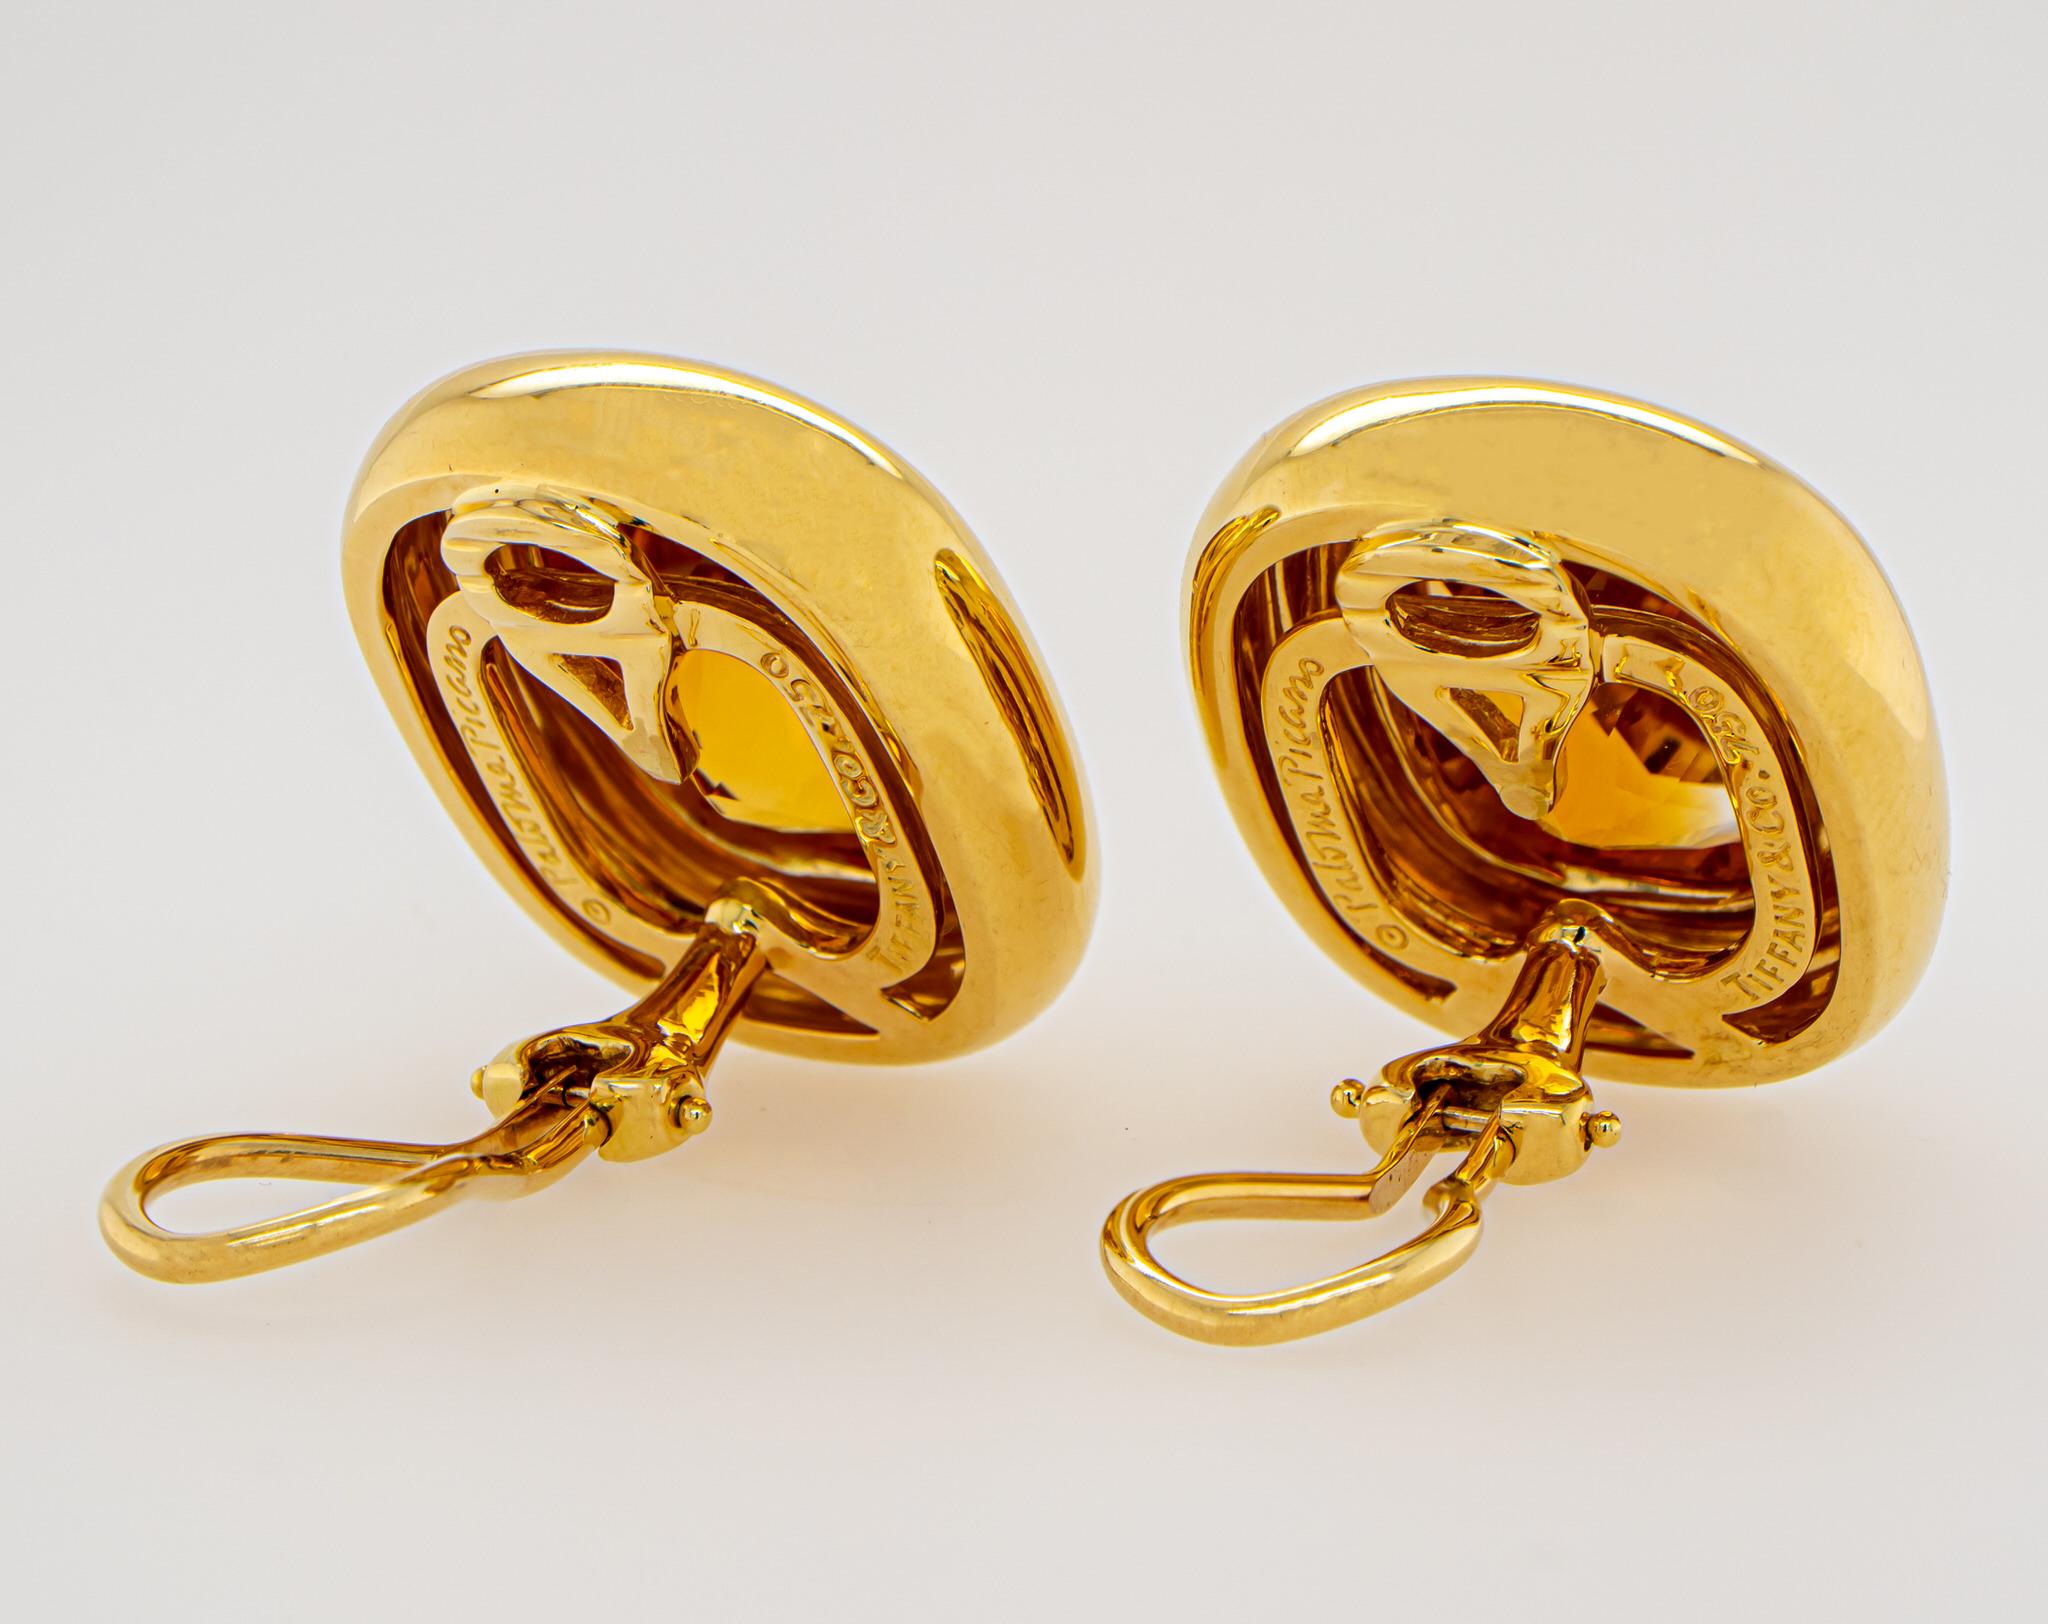 Tiffany & Co. Citrine Earrings Paloma Picasso Collection 18K Yellow Gold In Excellent Condition For Sale In Laguna Niguel, CA